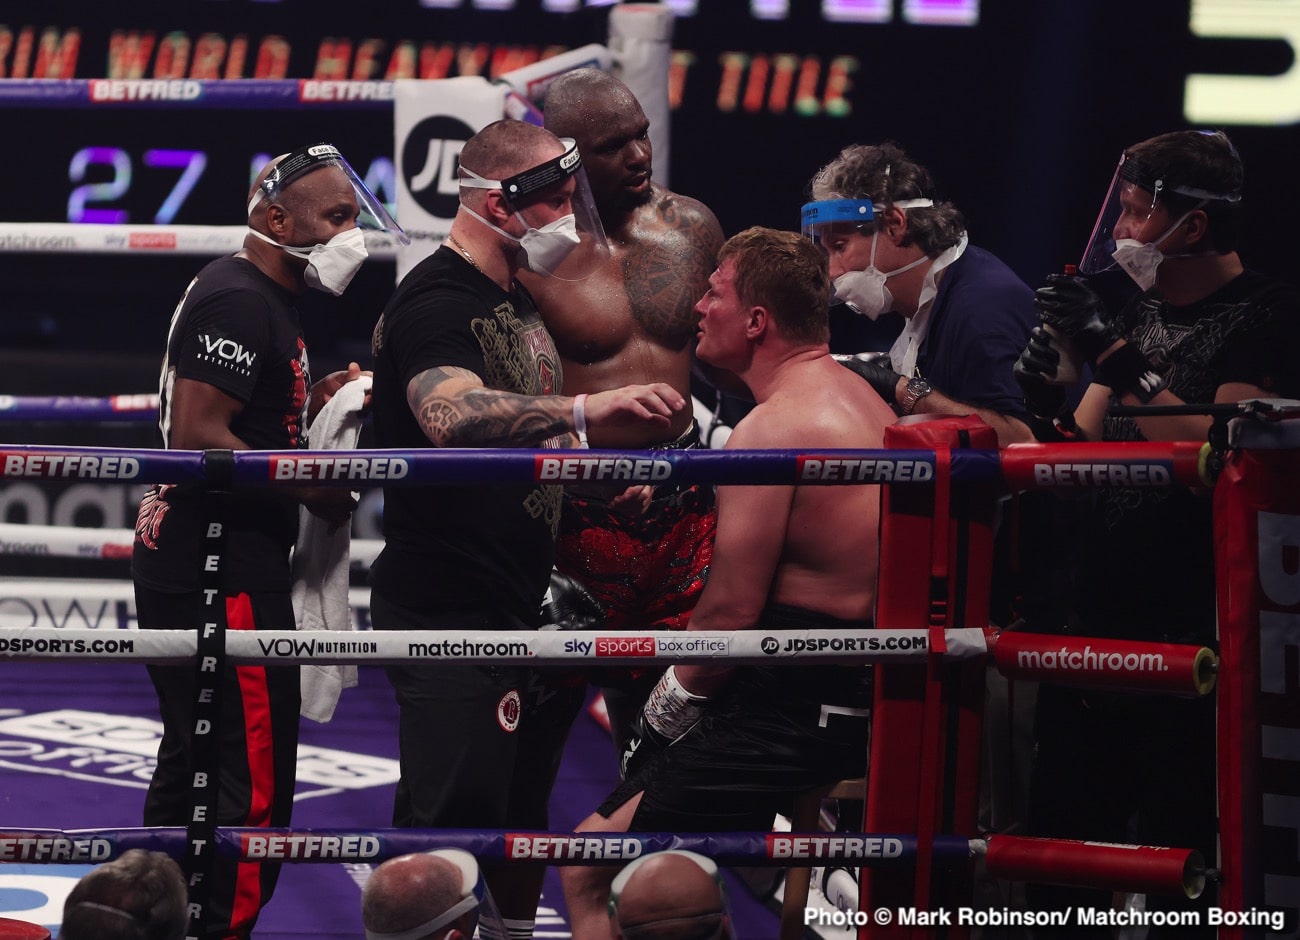 Dillian Whyte, Alexander Povetkin, Deontay Wilder, Eddie Hearn boxing photo and news image